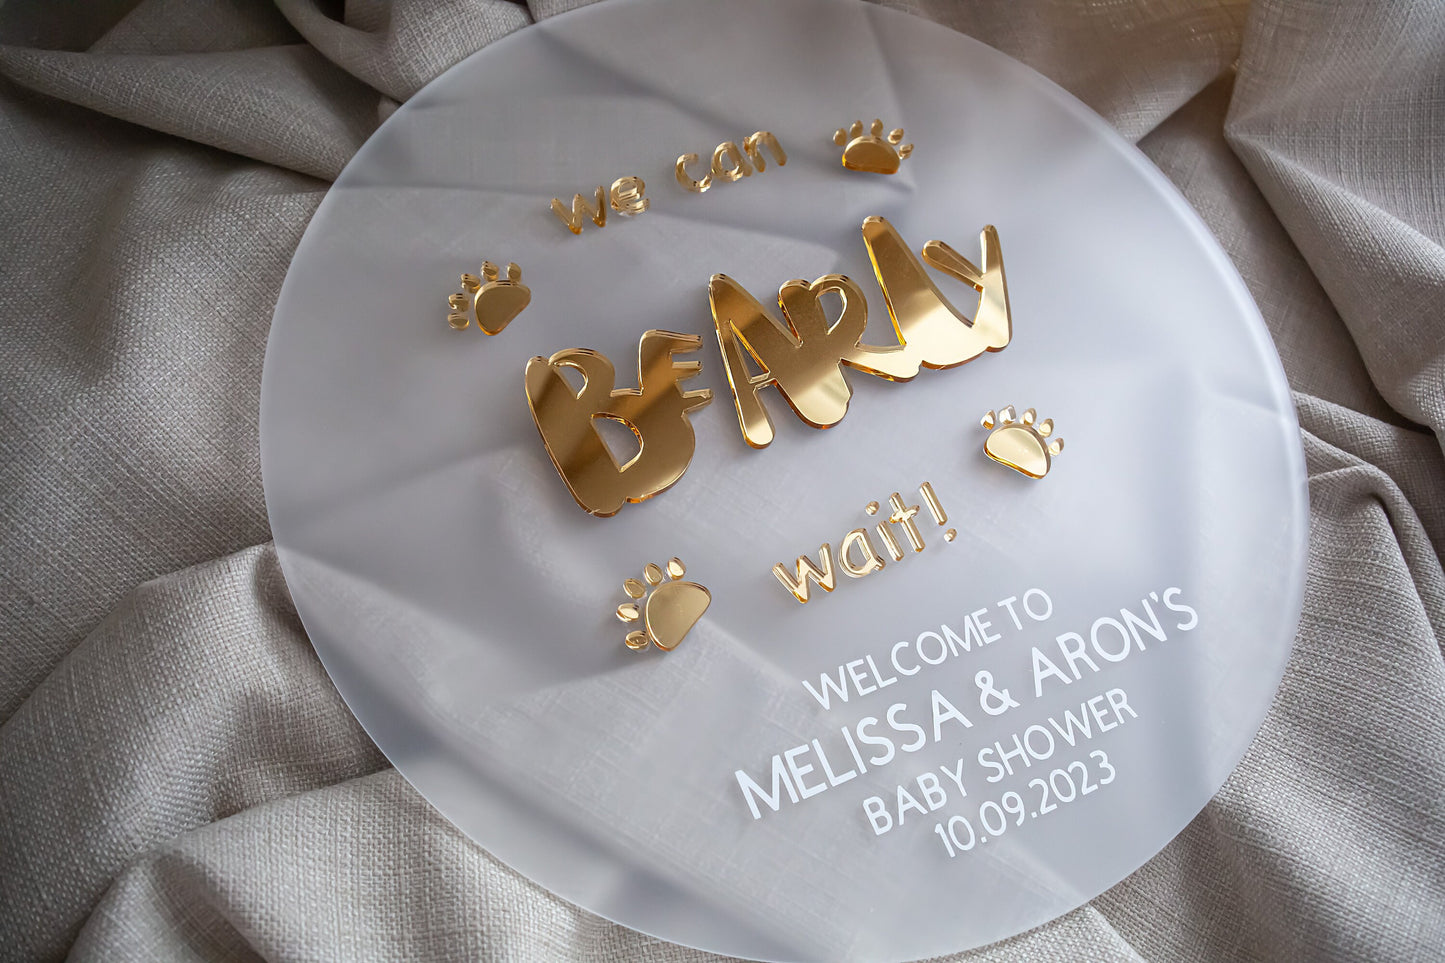 We Can Bearly Wait | Boy Shower Invitation | Bear Balloon Baby Shower Sign | Gender Neutral Baby Shower | Bear Theme Baby Shower | Acrylic